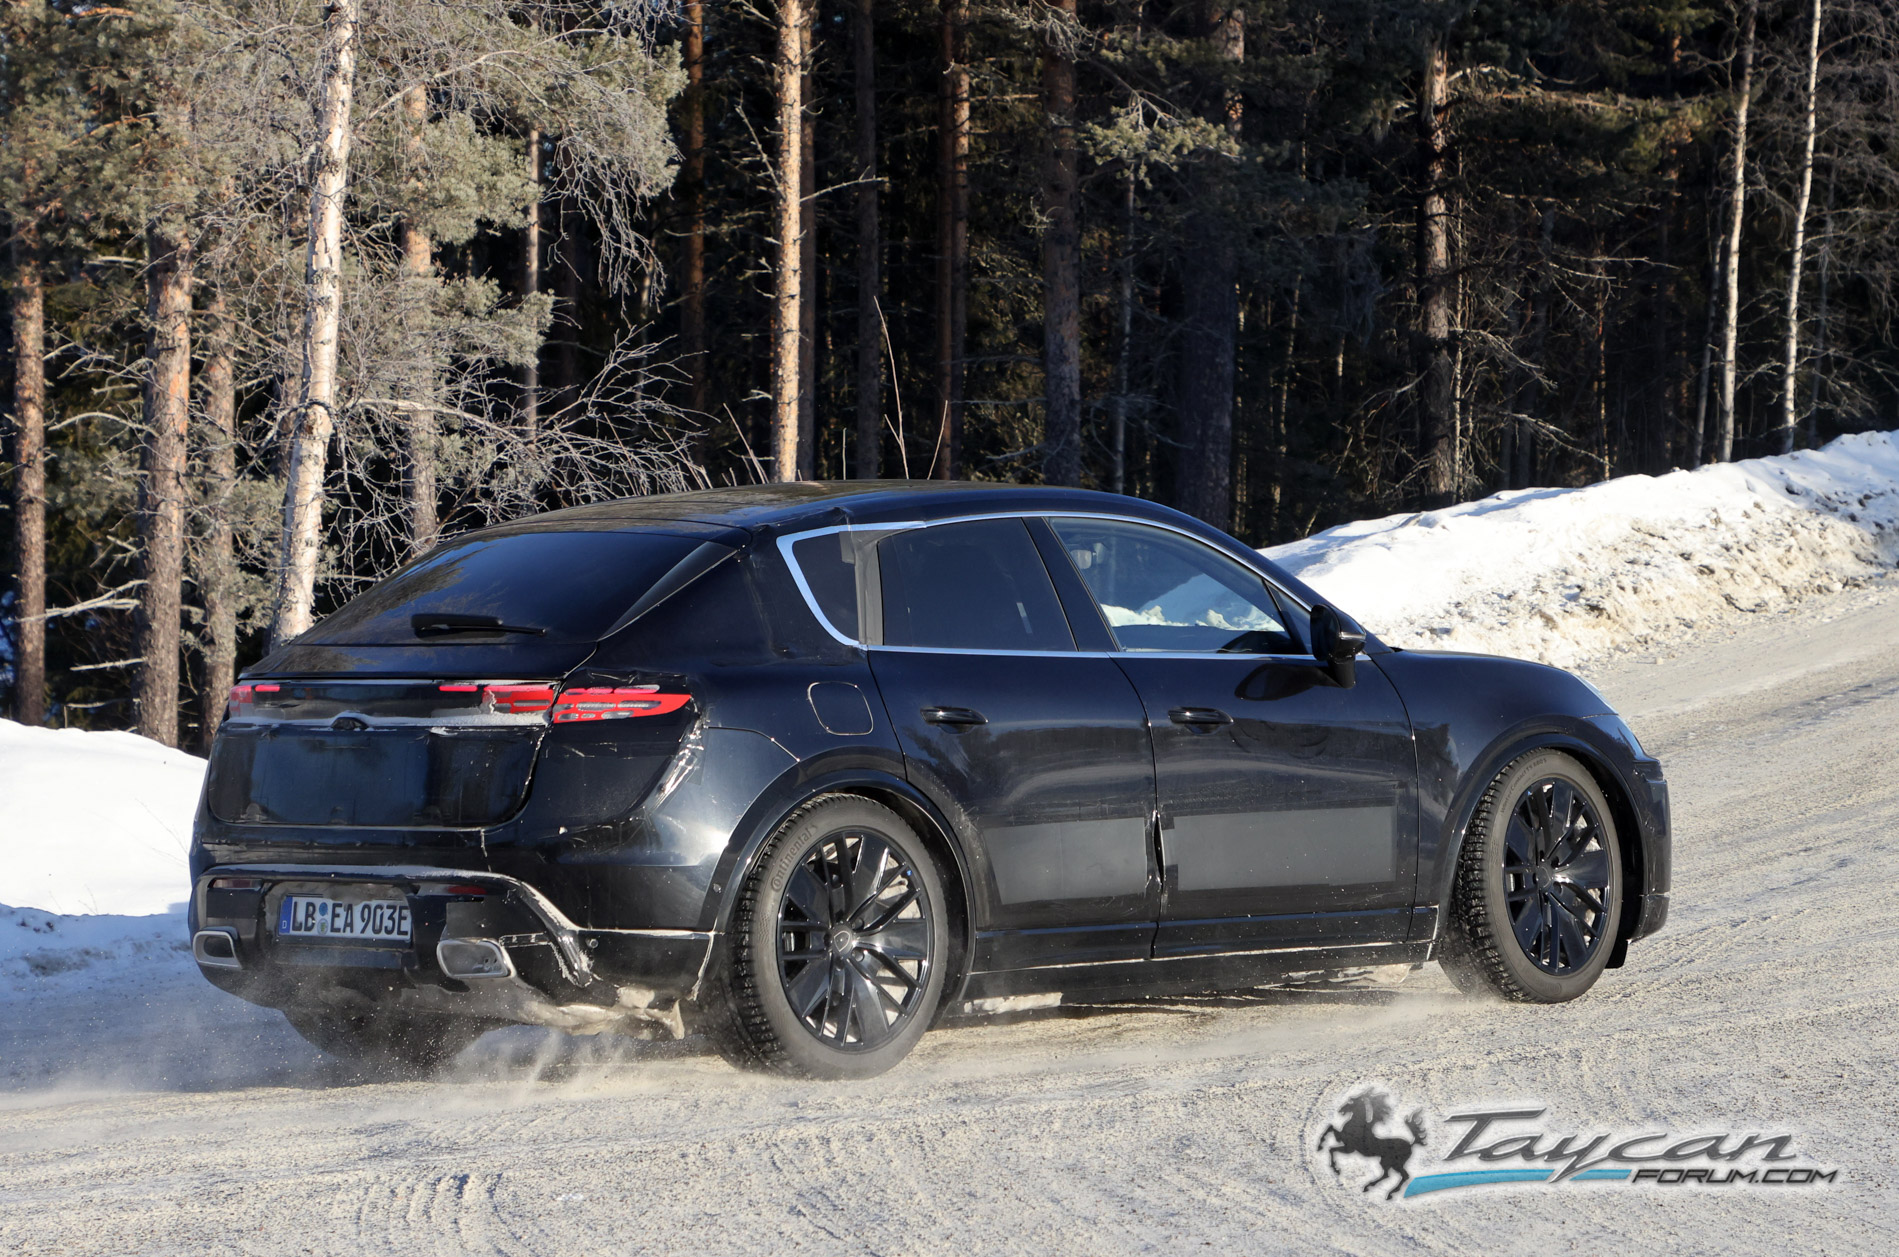 Macan EV Macan EV Interior Spied Uncovered! + Latest Cold Climate Testing Photos Porsche Macan 16